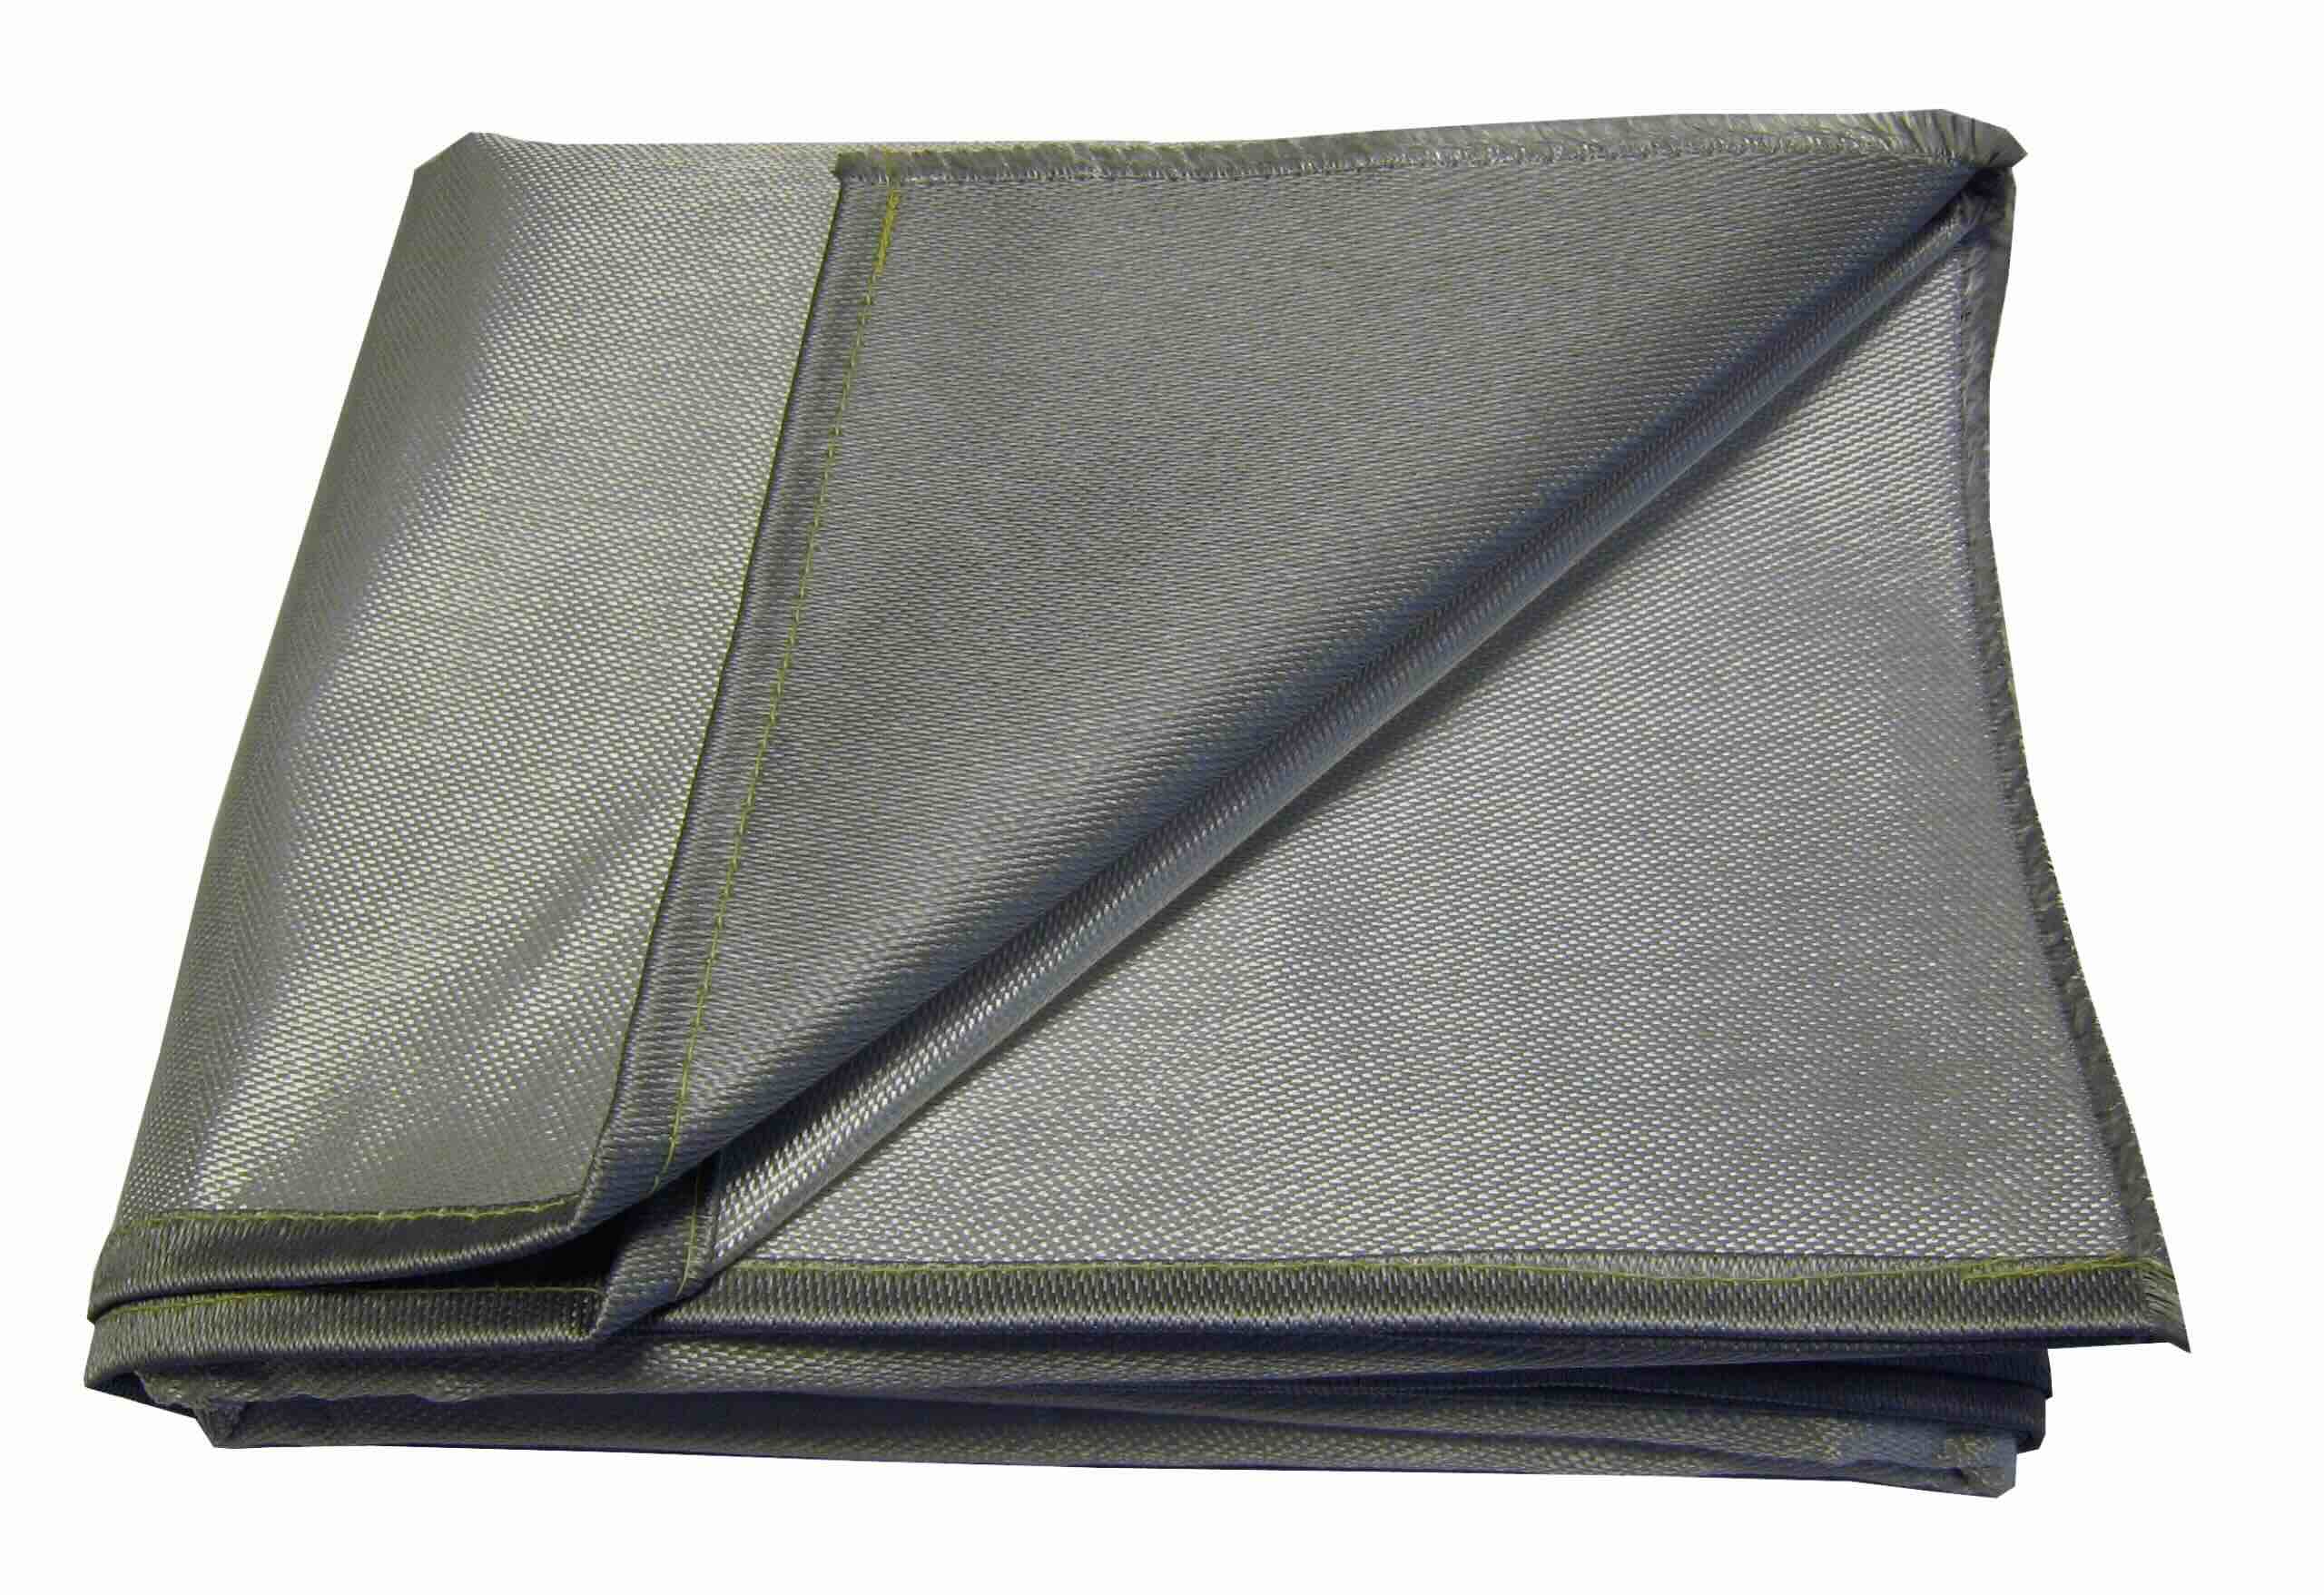 2 pack - Welding Blanket 4x6 Fiberglass. Cover, Retardant | Fireproof.  Thermal resistant insulation. Brass grommets for easy Hanging and Protection